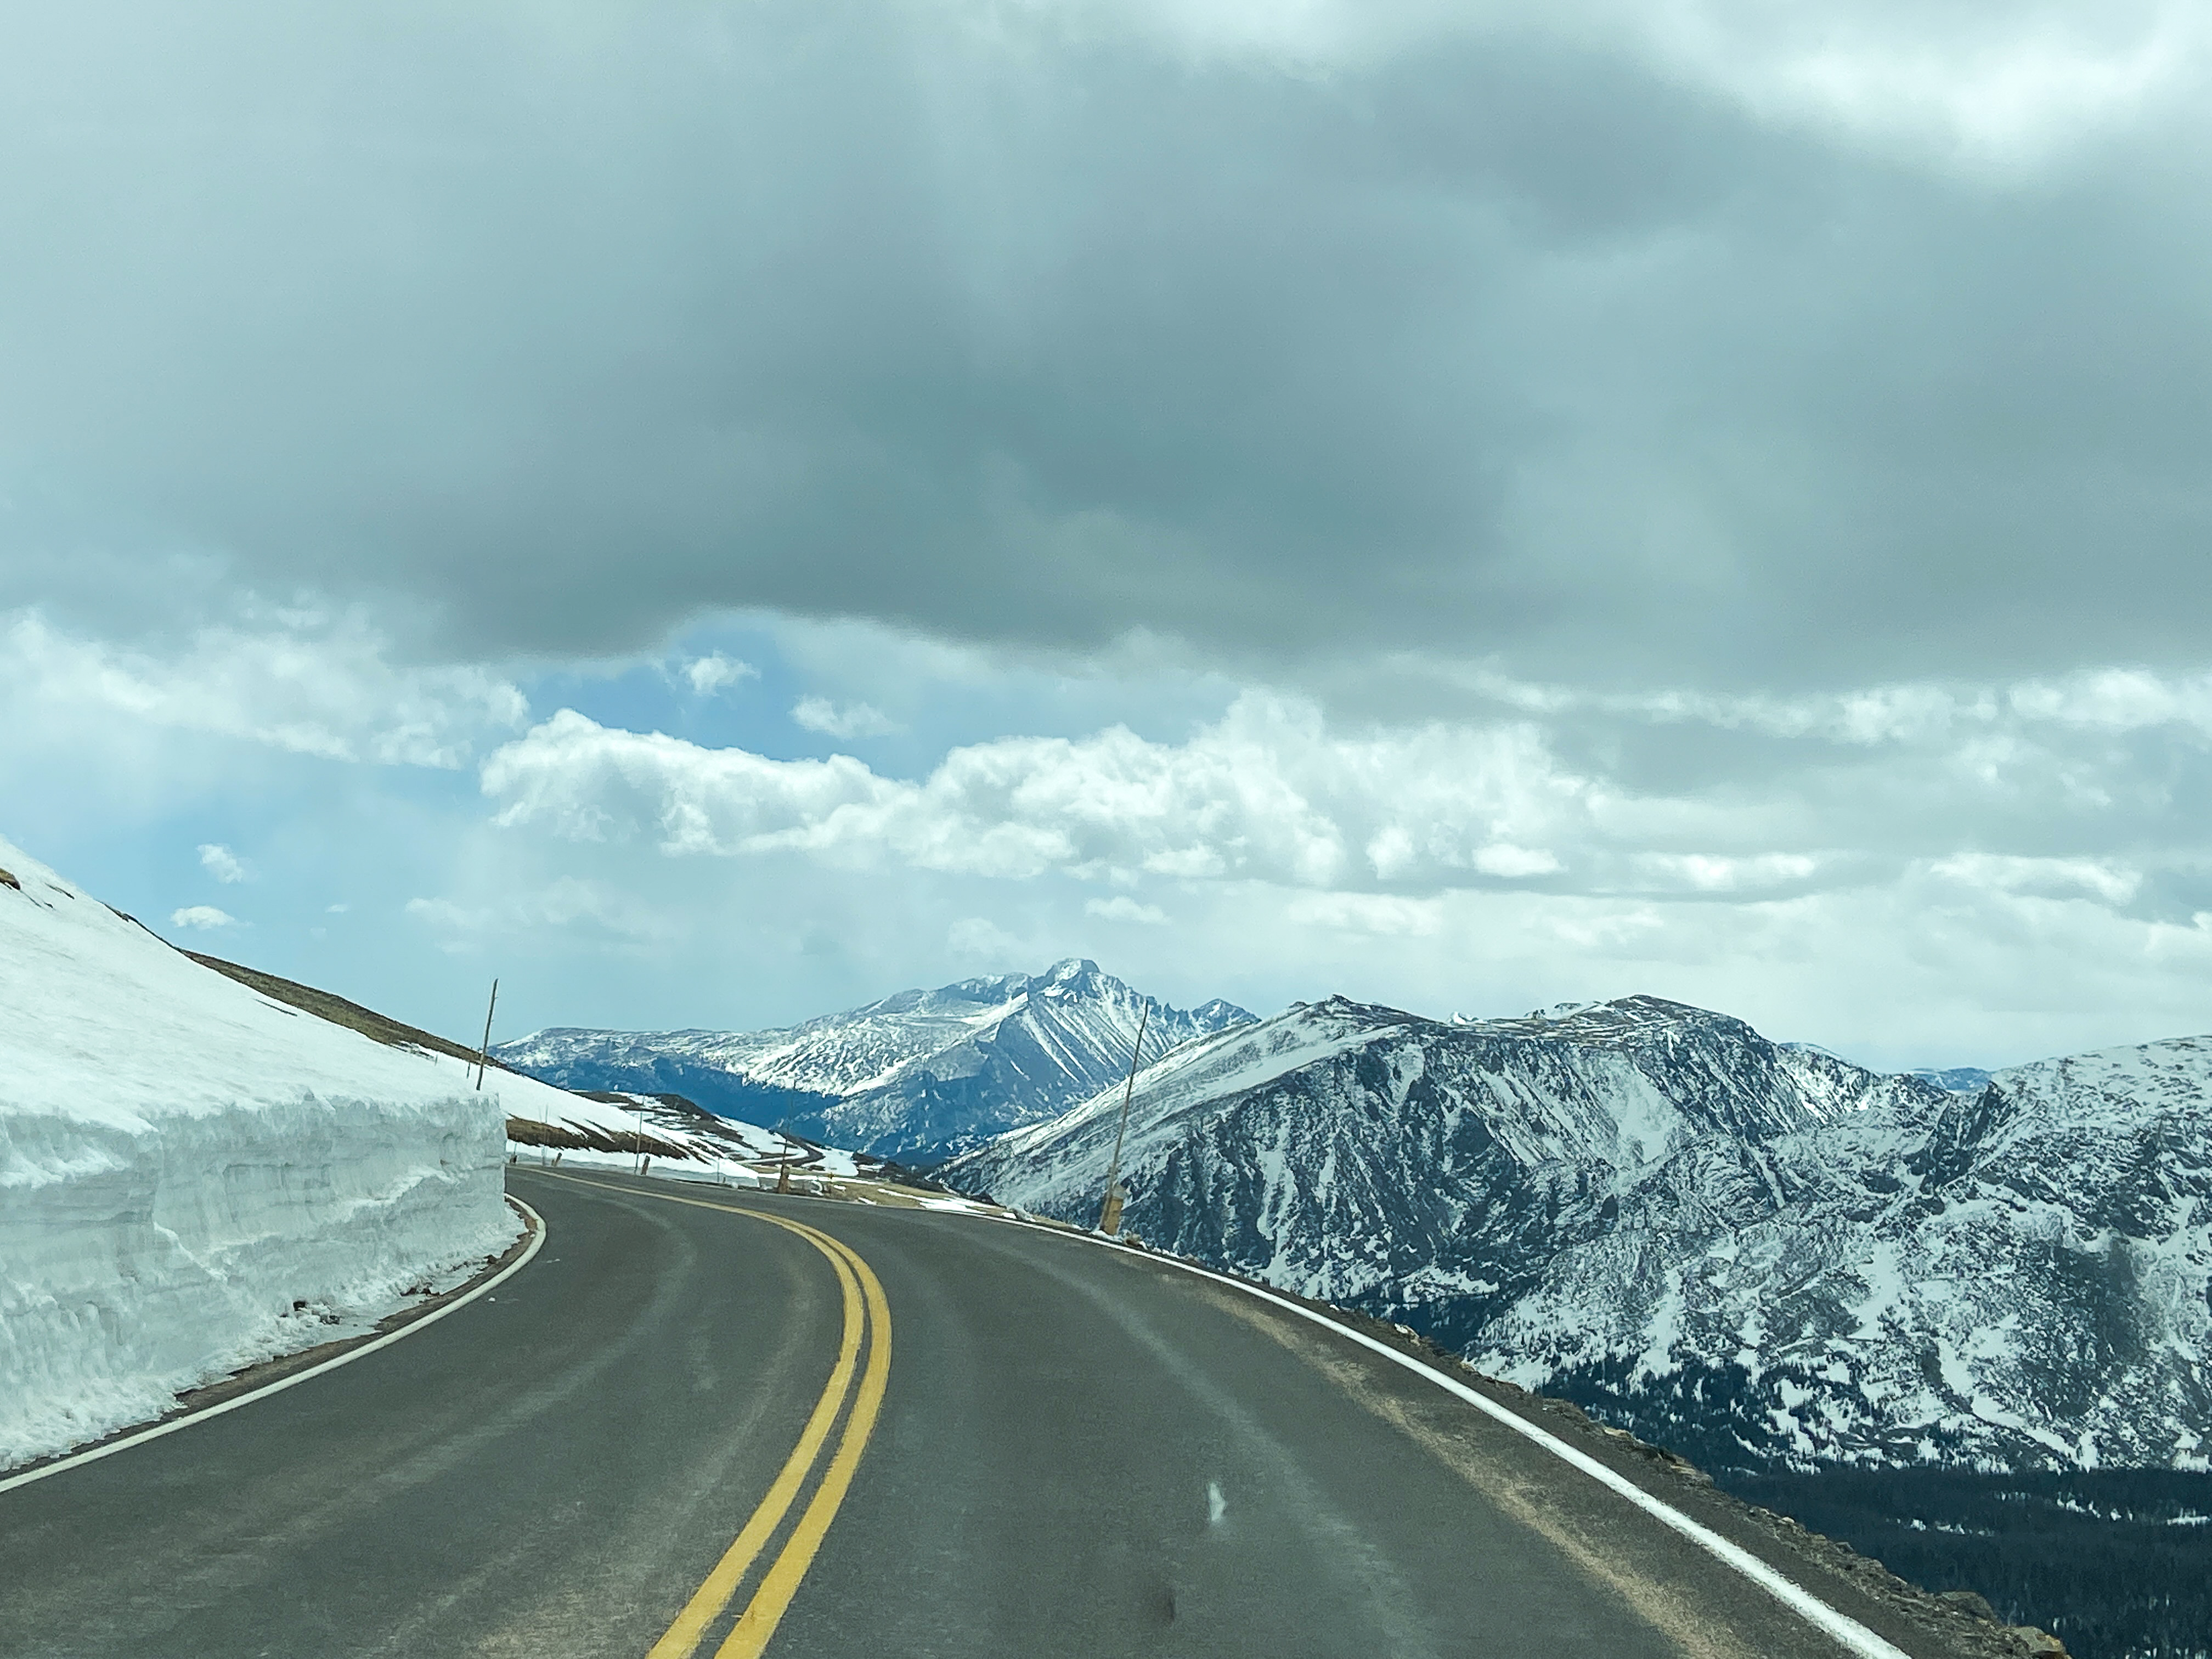 Trail Ridge Road in Rocky Mountain National Park in May 2022